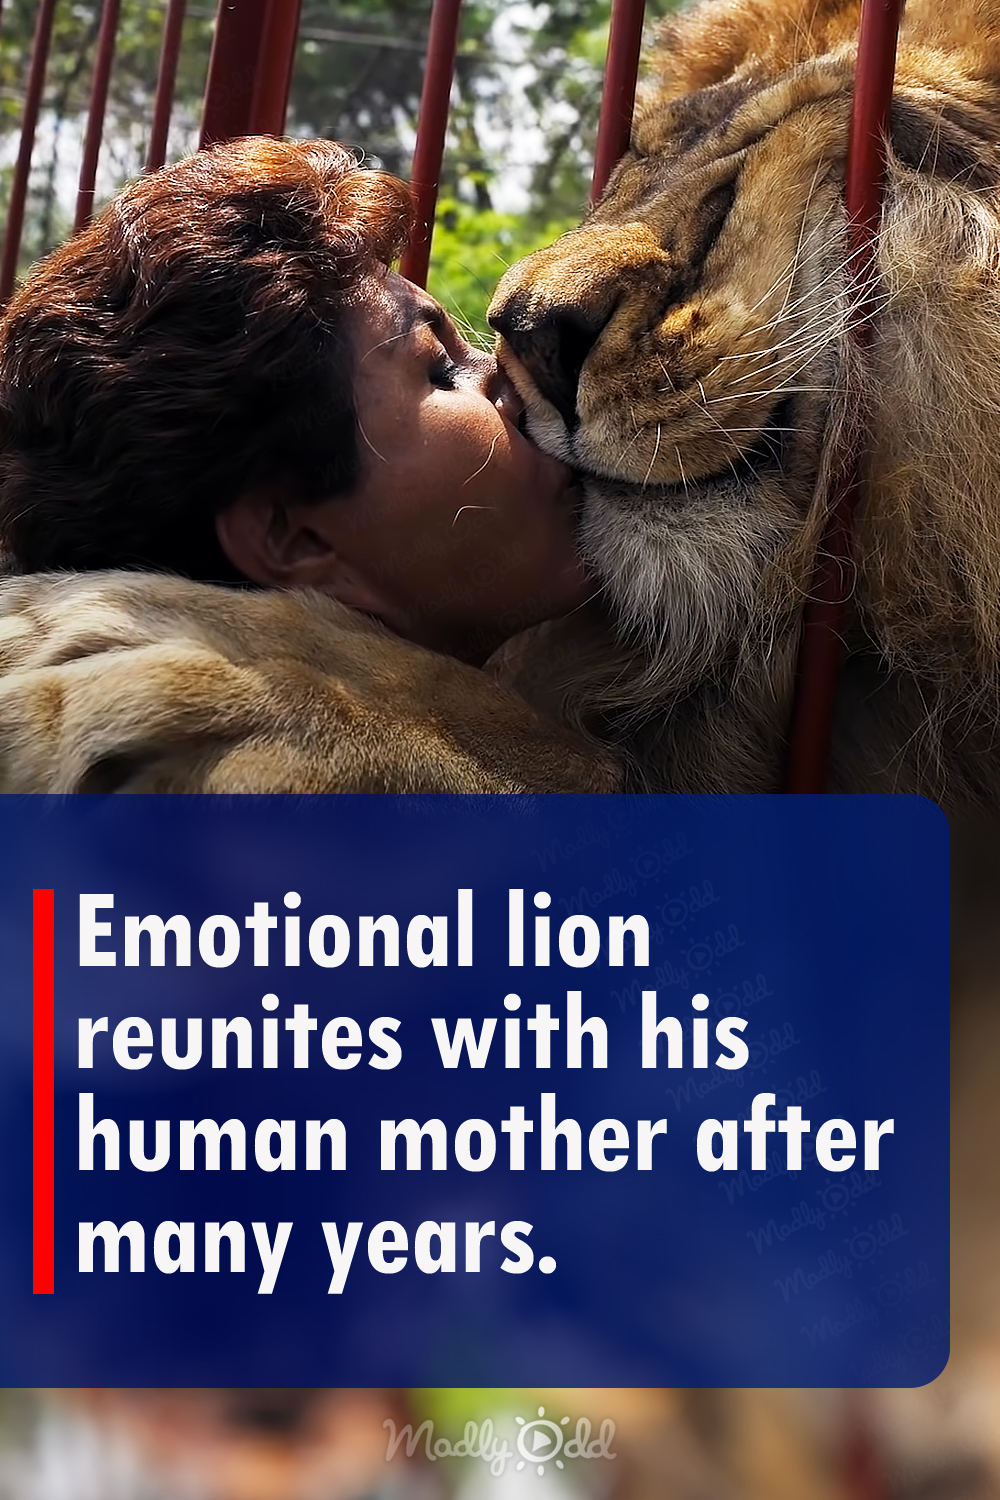 Emotional lion reunites with his human mother after many years.